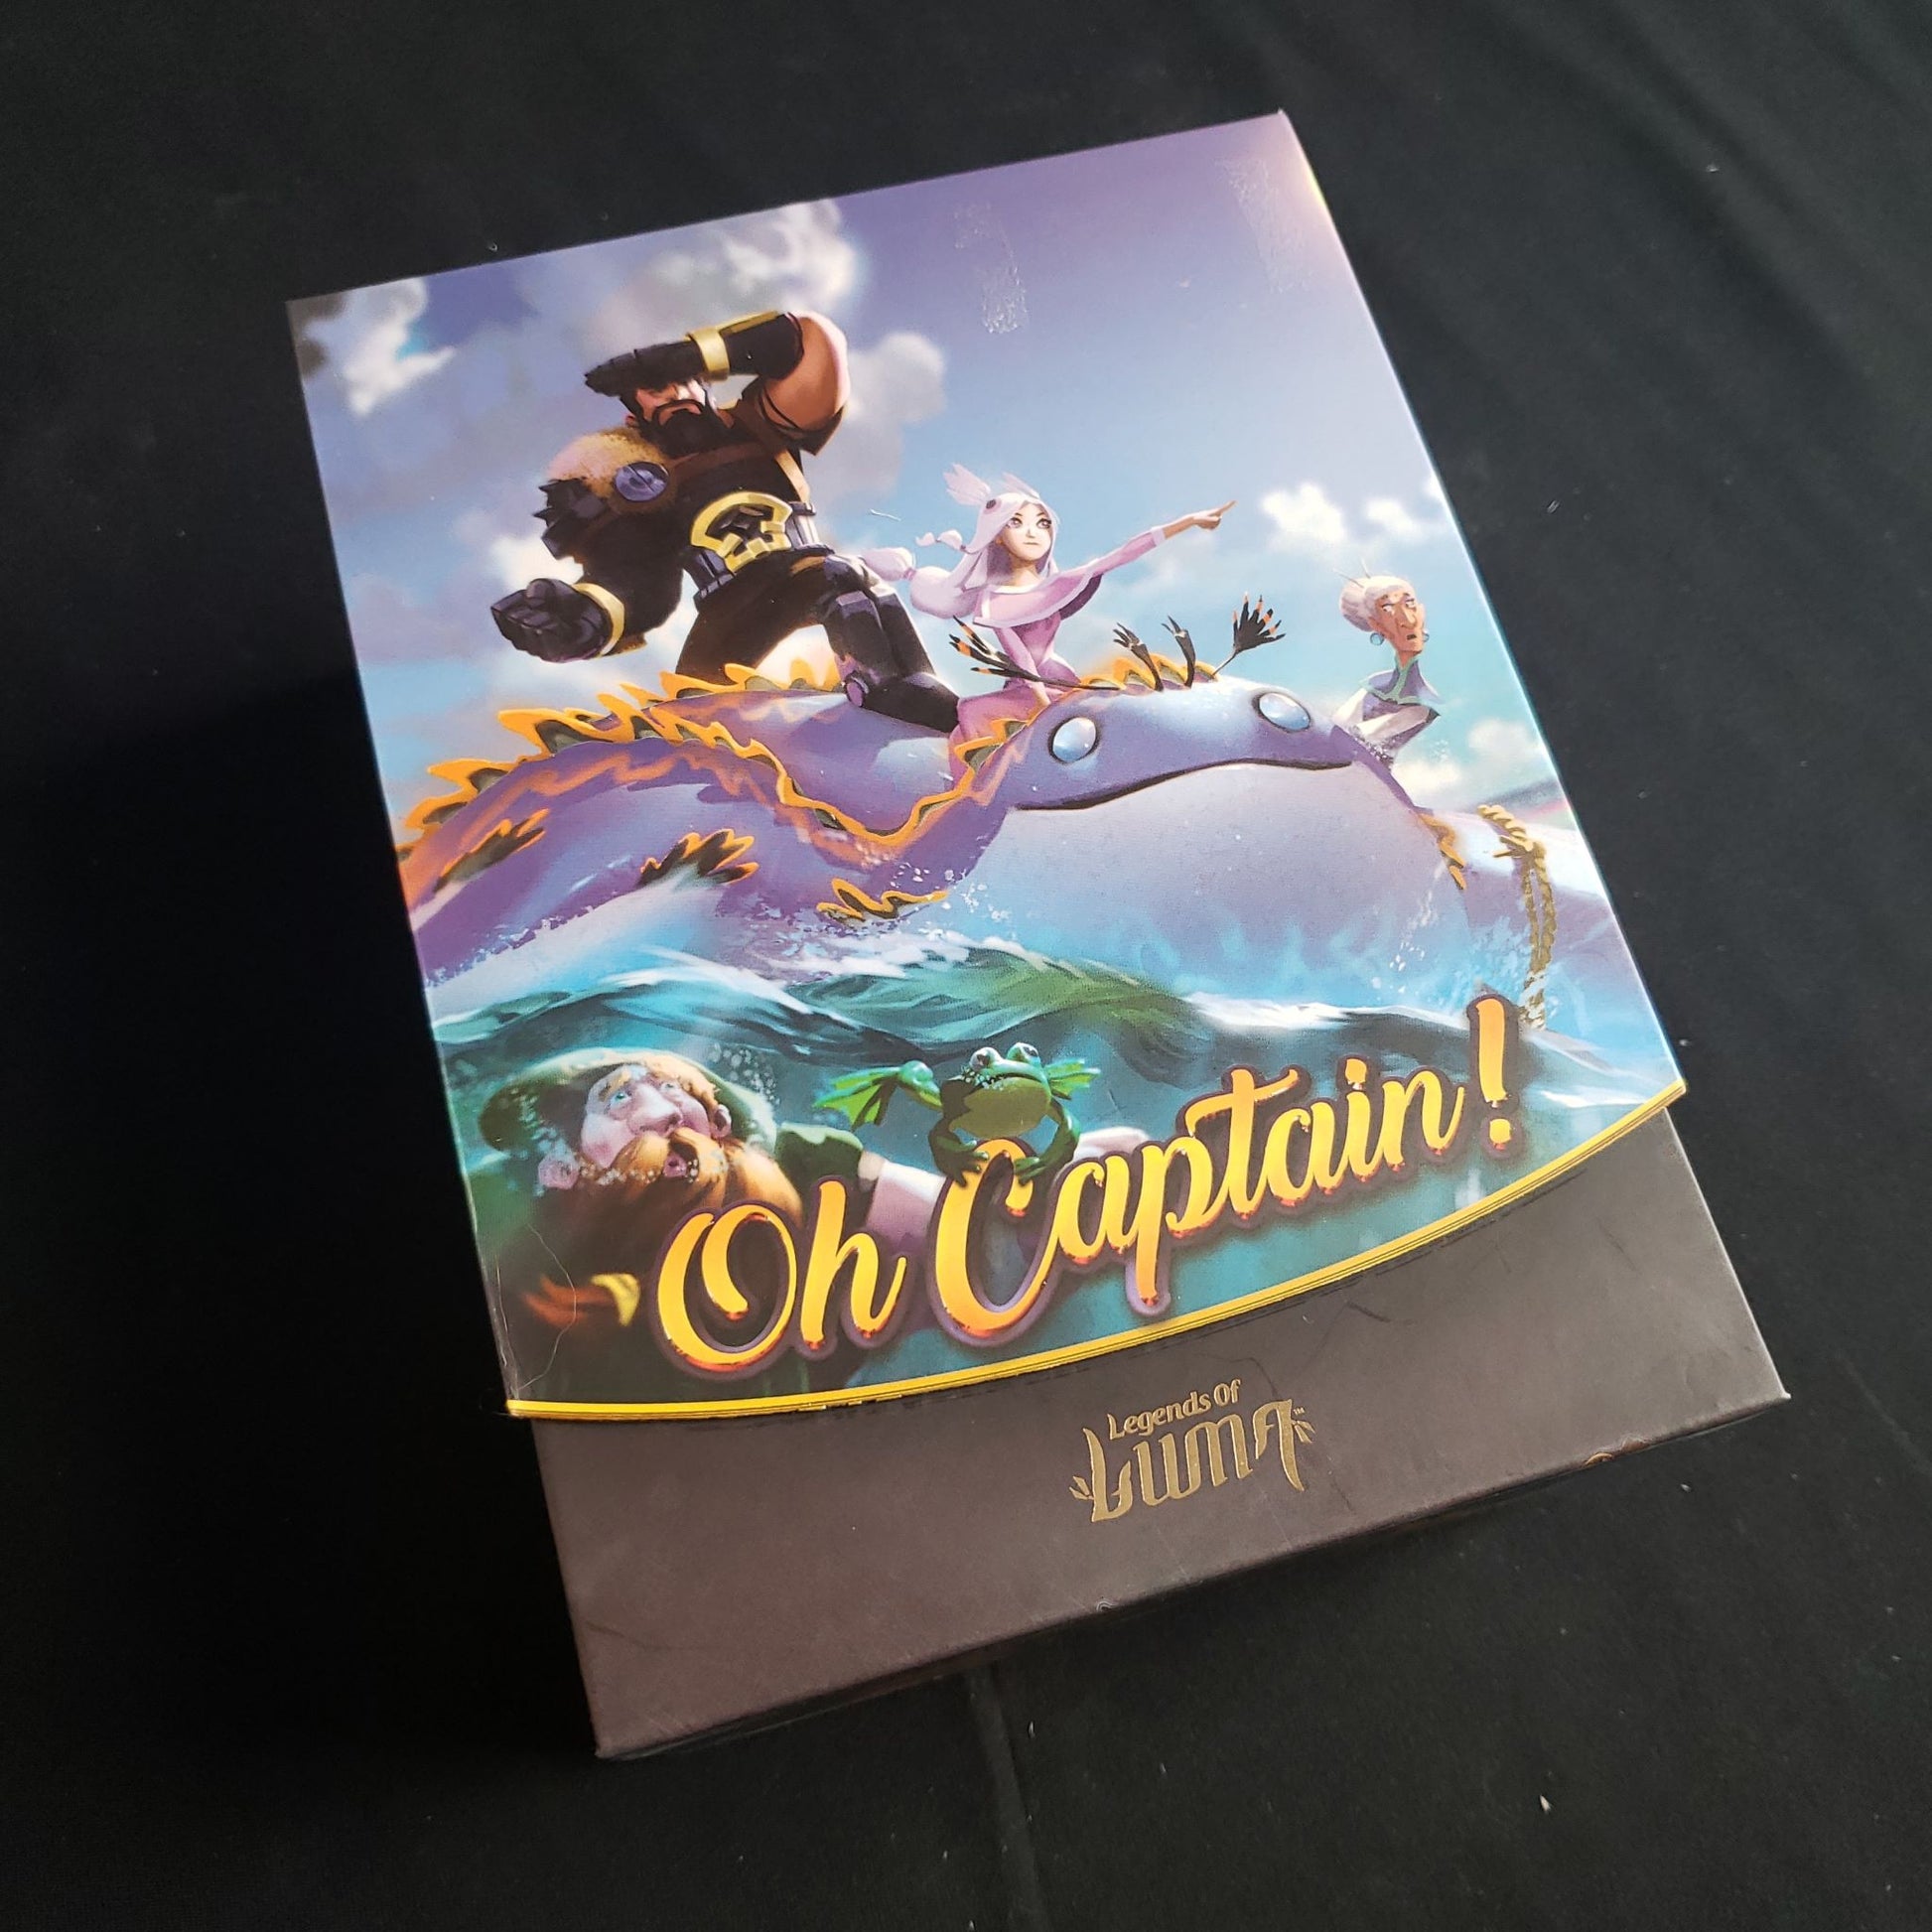 Image shows the front cover of the box of the Oh Captain! card game